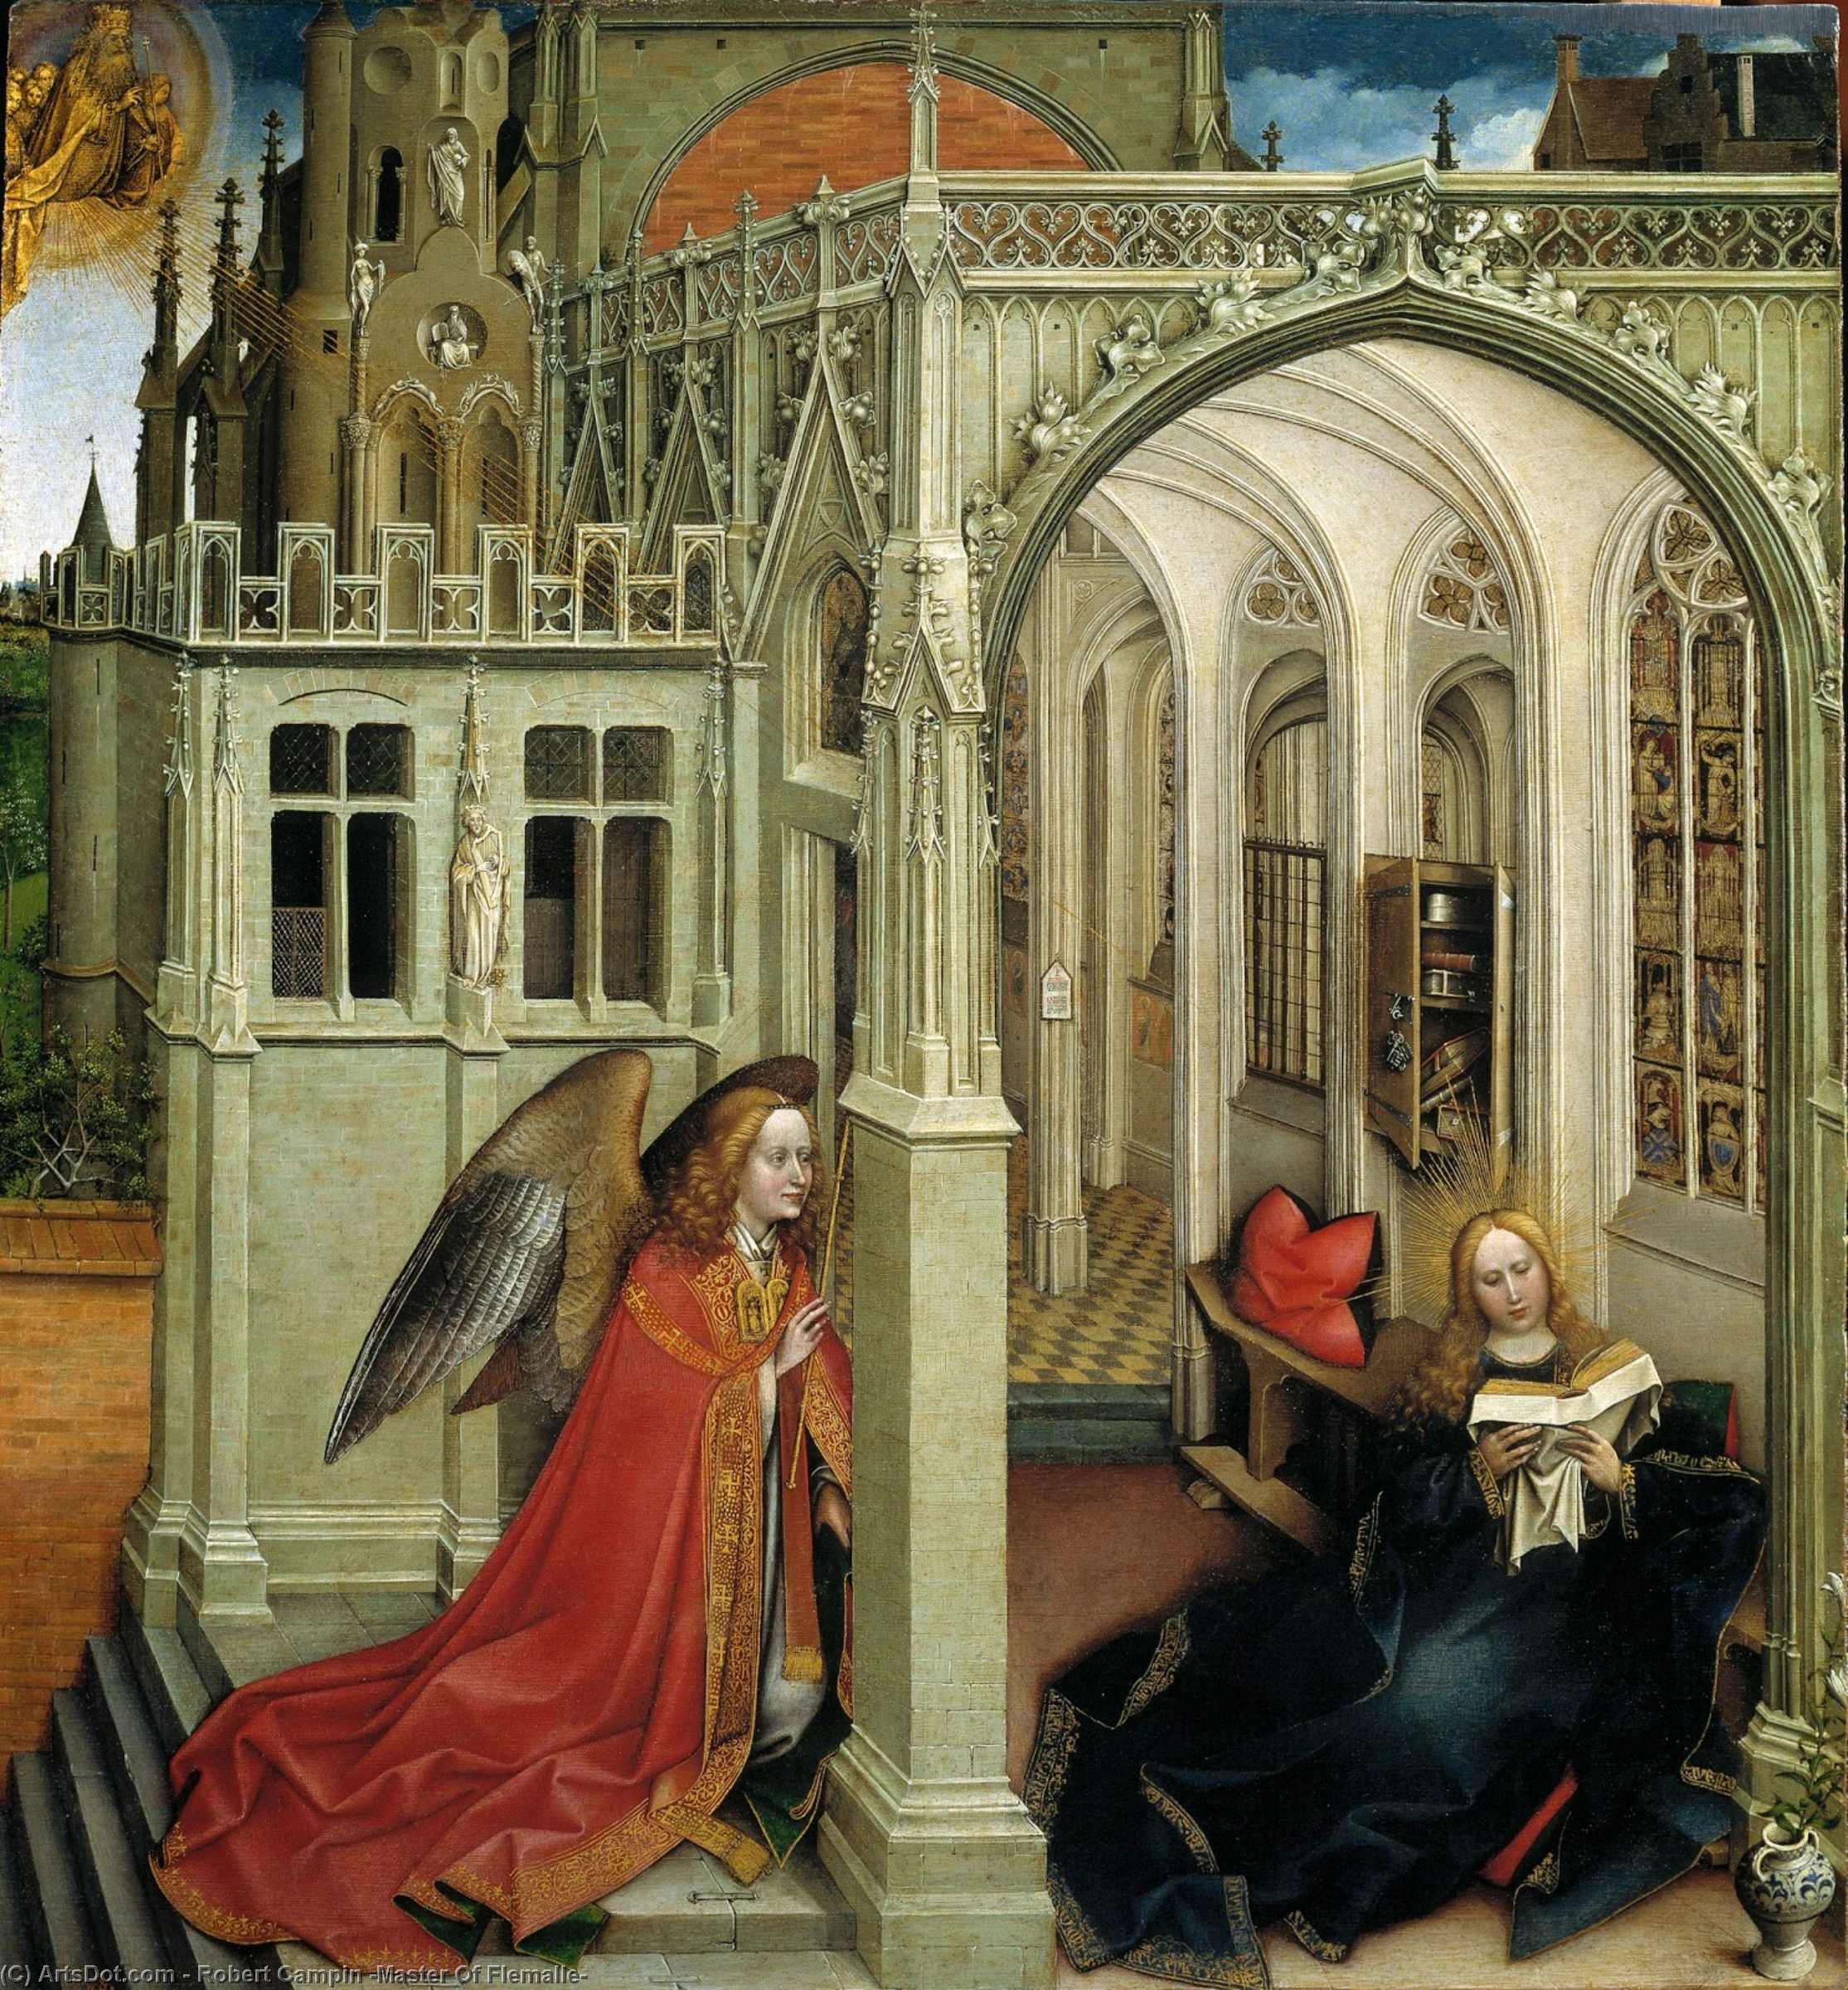  Art Reproductions The Annunciation by Robert Campin (Master Of Flemalle) (1375-1444, France) | ArtsDot.com